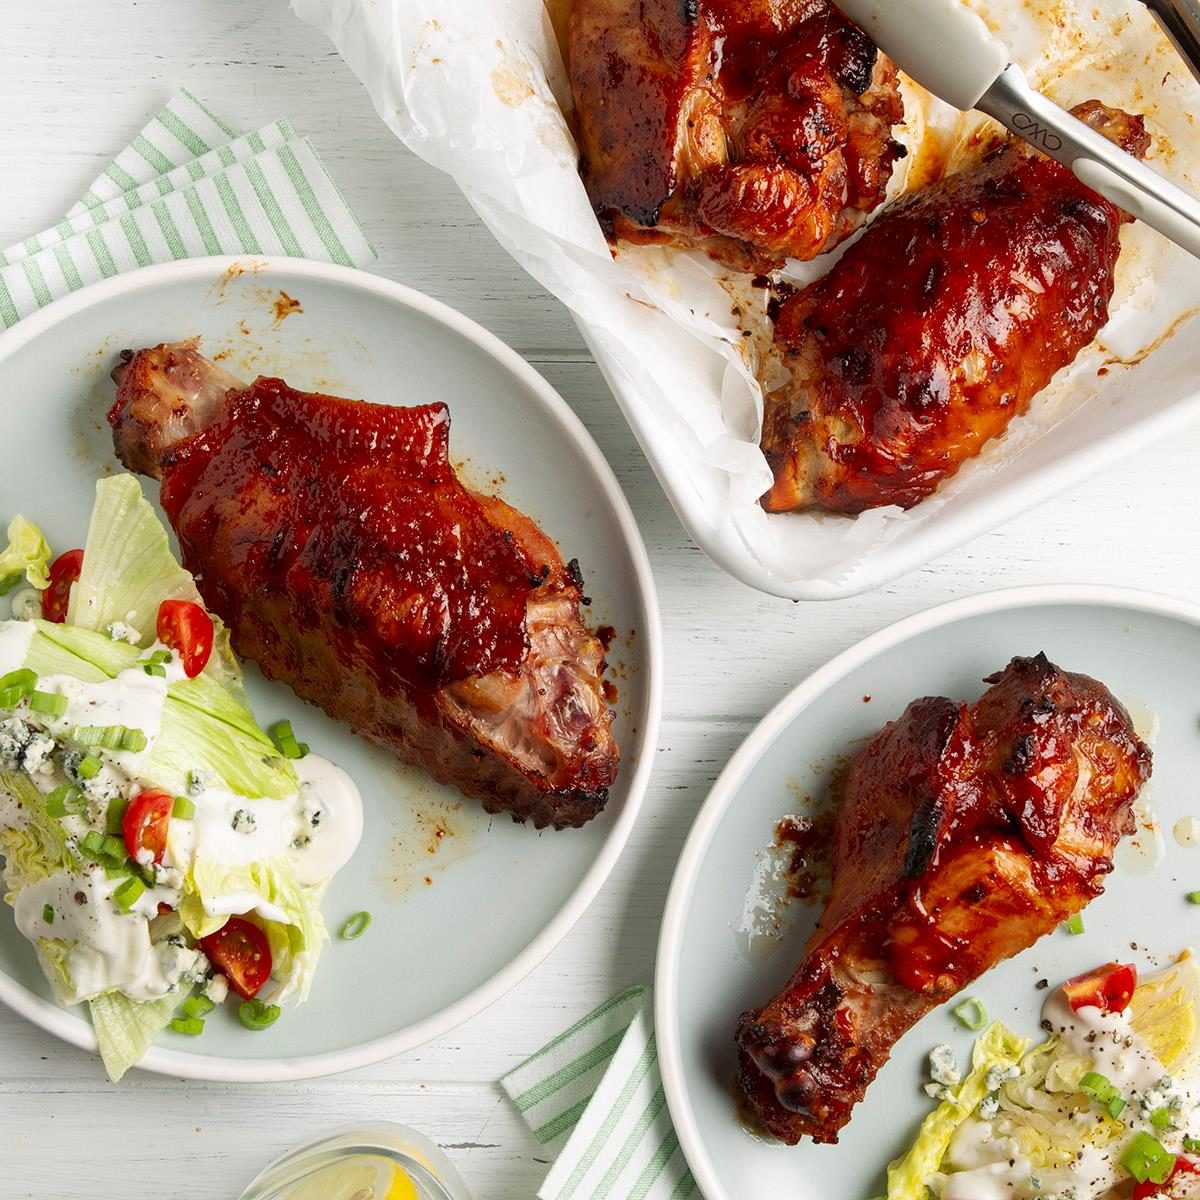 https://www.tasteofhome.com/wp-content/uploads/2018/01/Barbecue-Turkey-Wings_EXPS_FT21_22790_F_0518_1.jpg?fit=700%2C1024